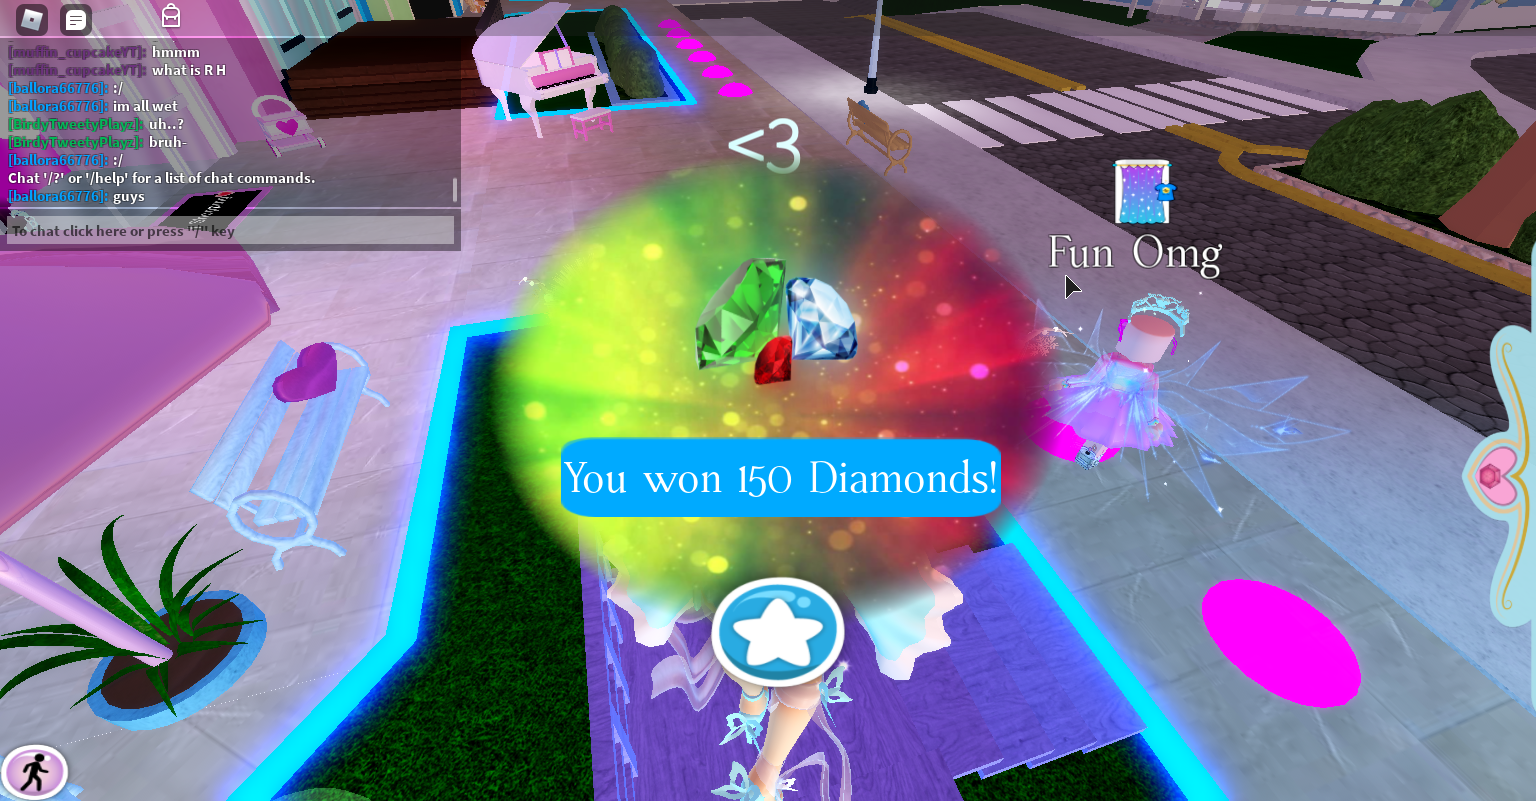 Discuss Everything About Royale High Wiki Fandom - how to get tons of diamonds in royale high fast no gamepasses roblox royale high school